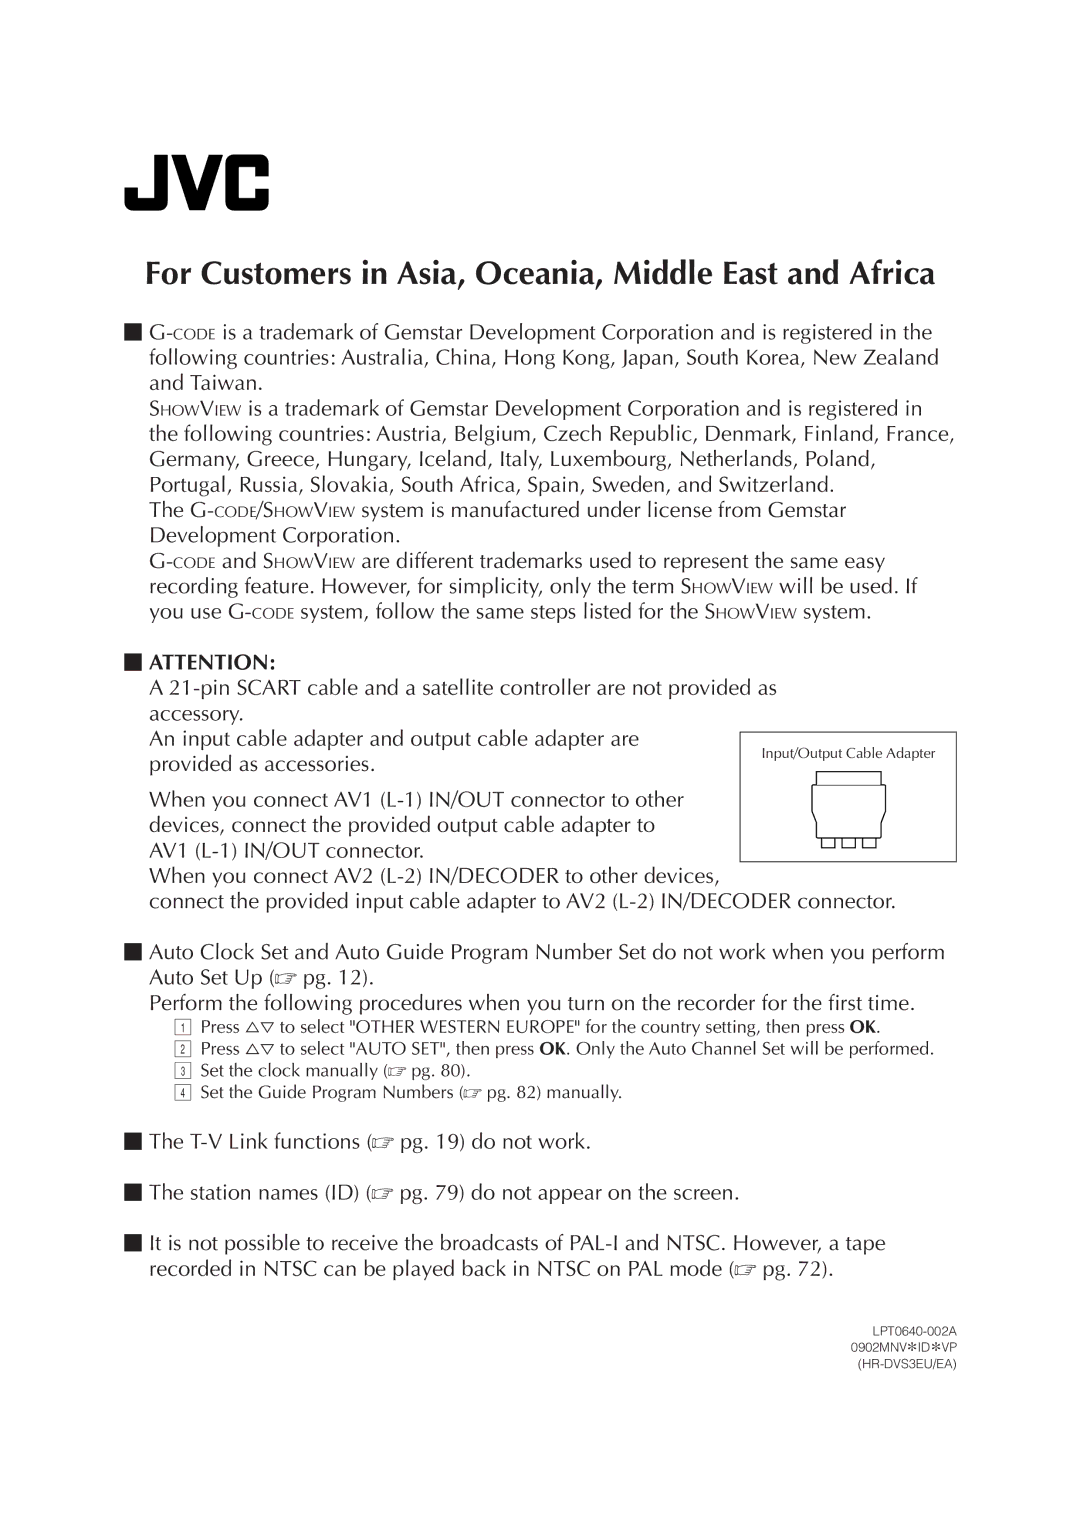 JVC LPT0640-001A specifications For Customers in Asia, Oceania, Middle East and Africa 